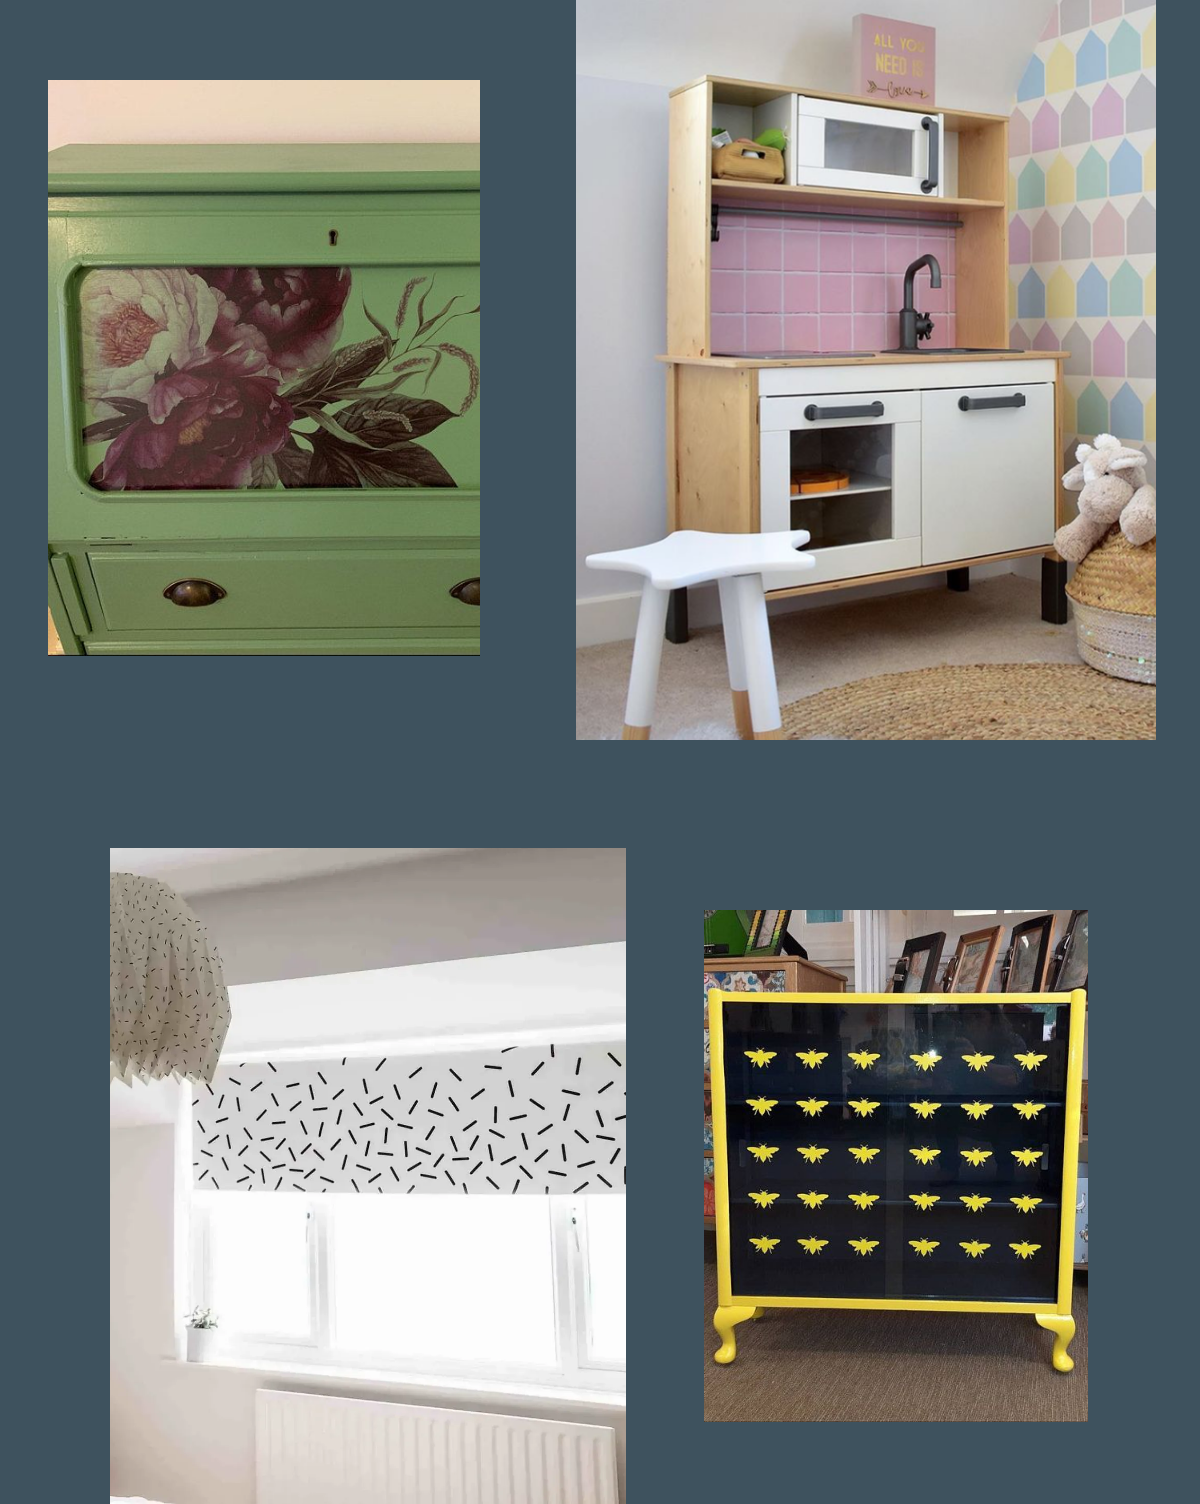 Furniture upcycling revamp using wall stickers